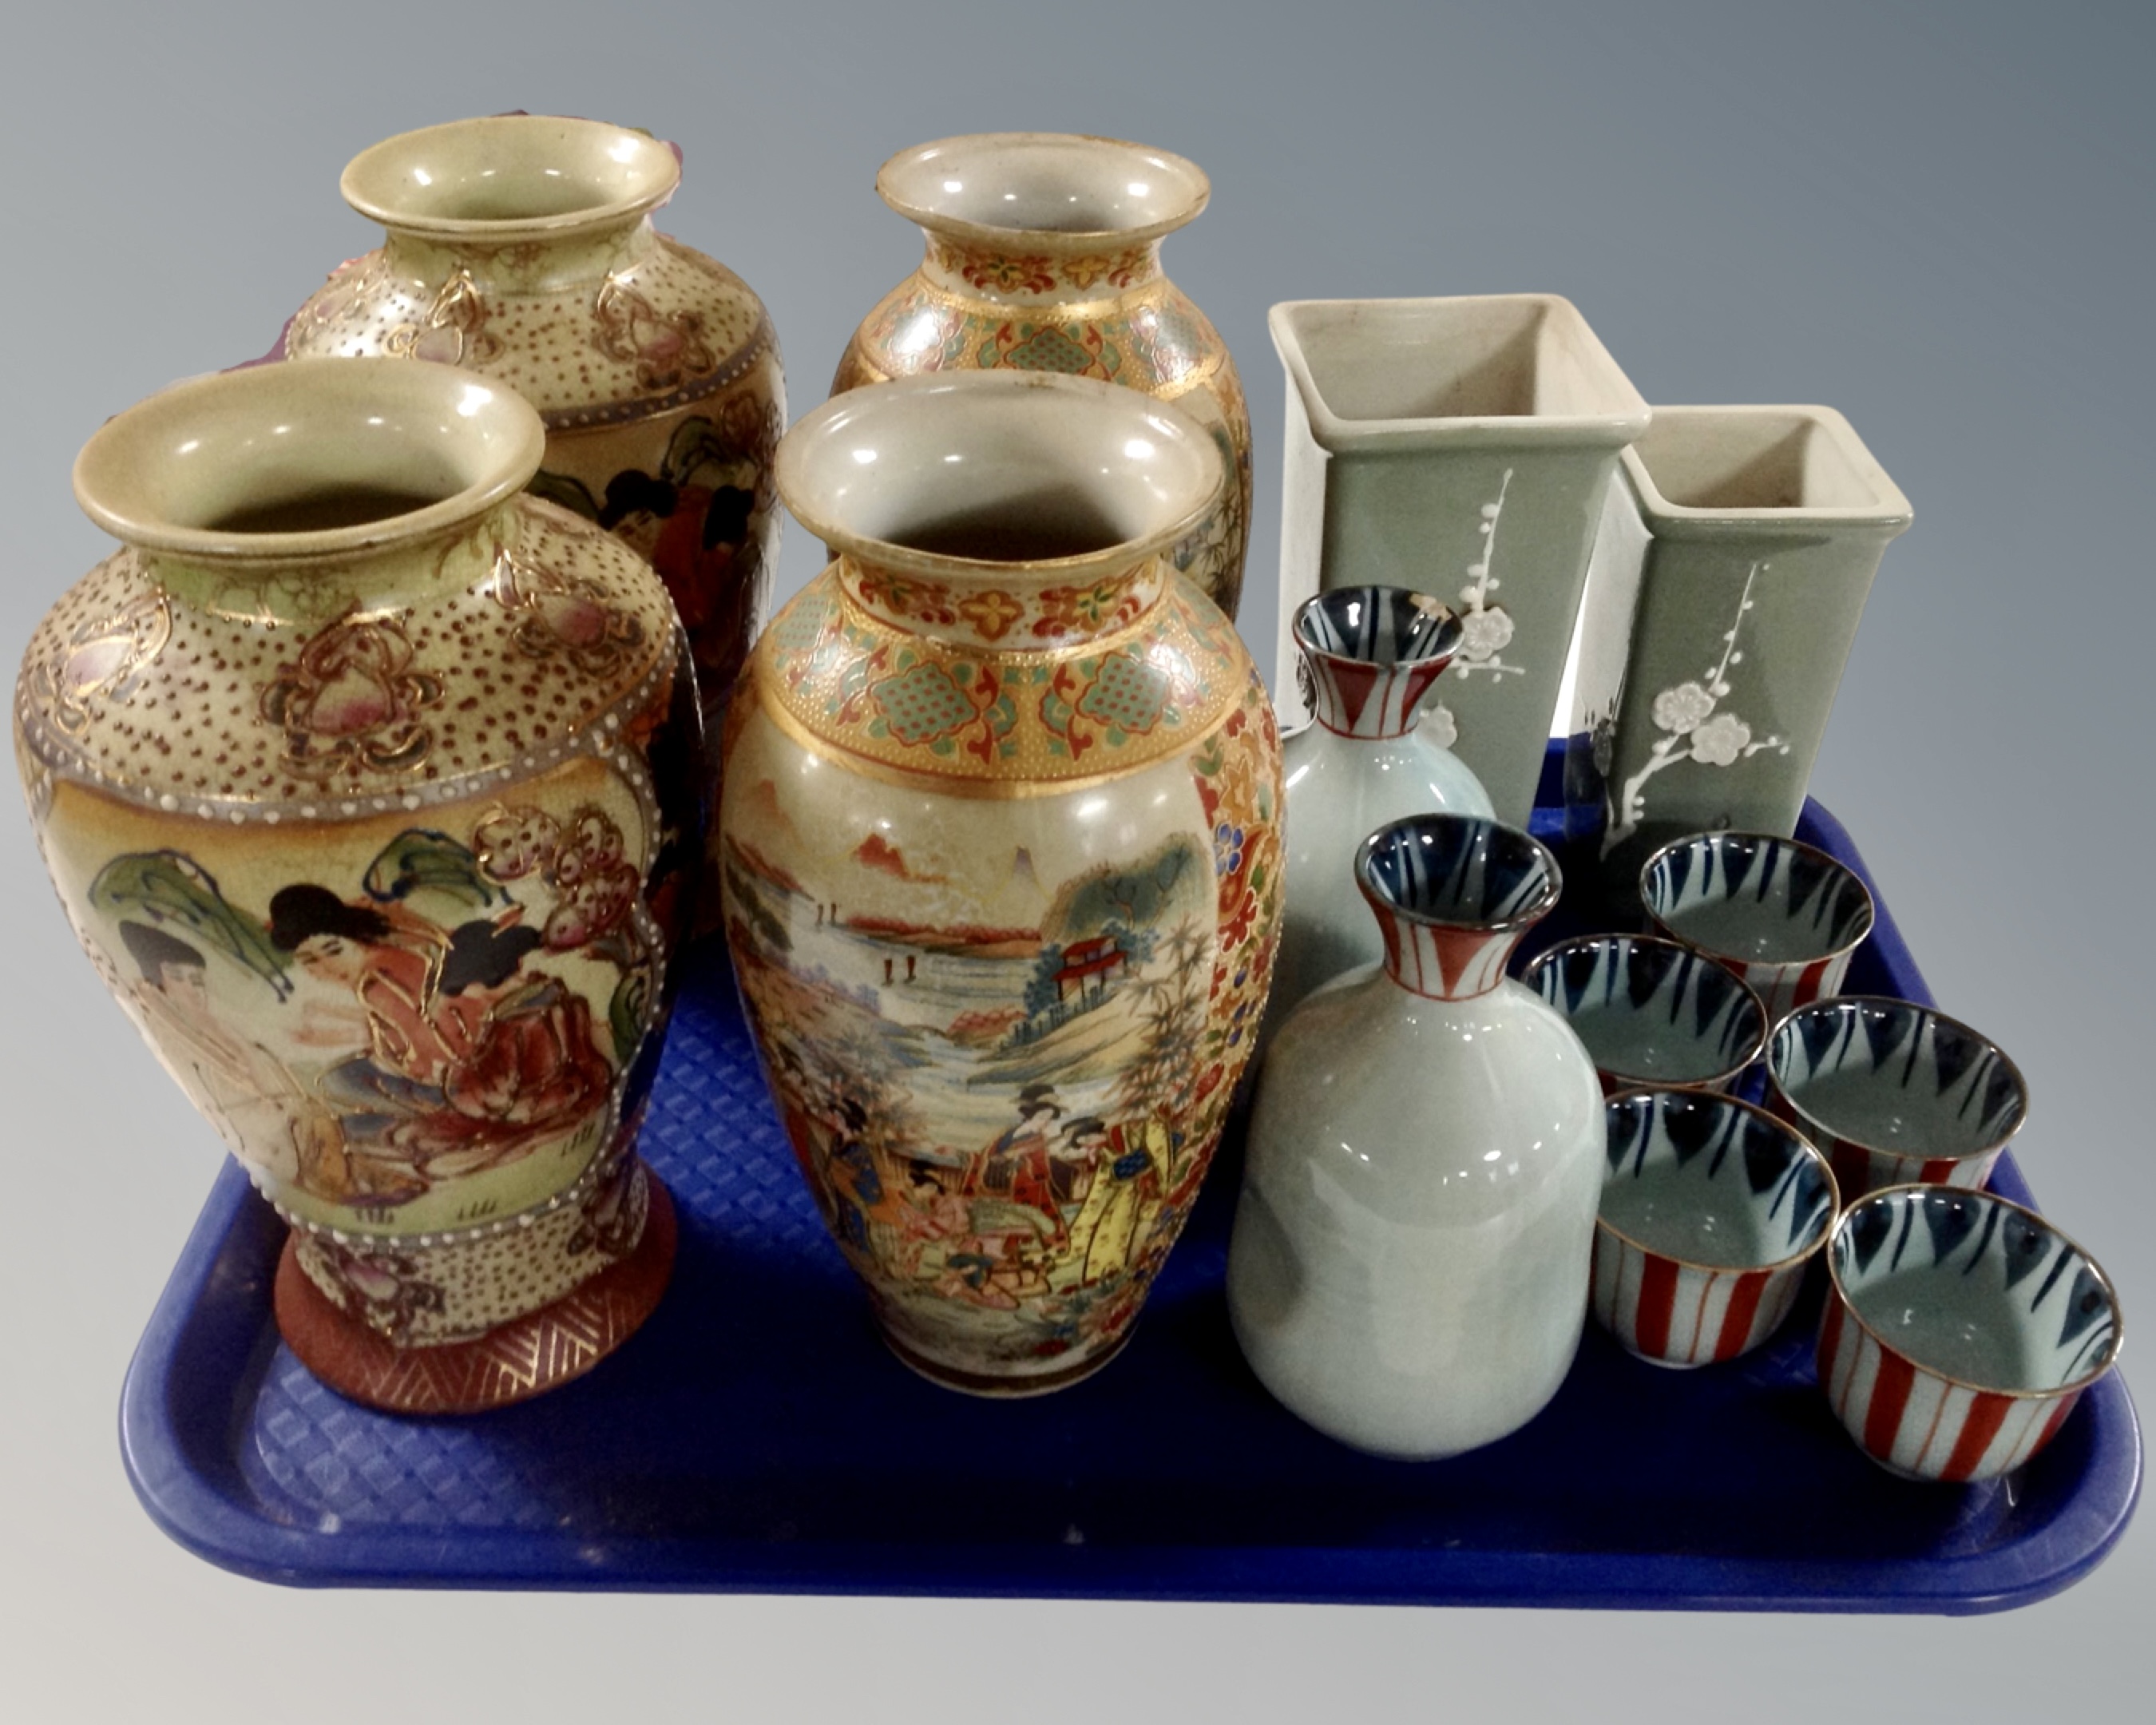 A tray containing Japanese vases and sake sets.